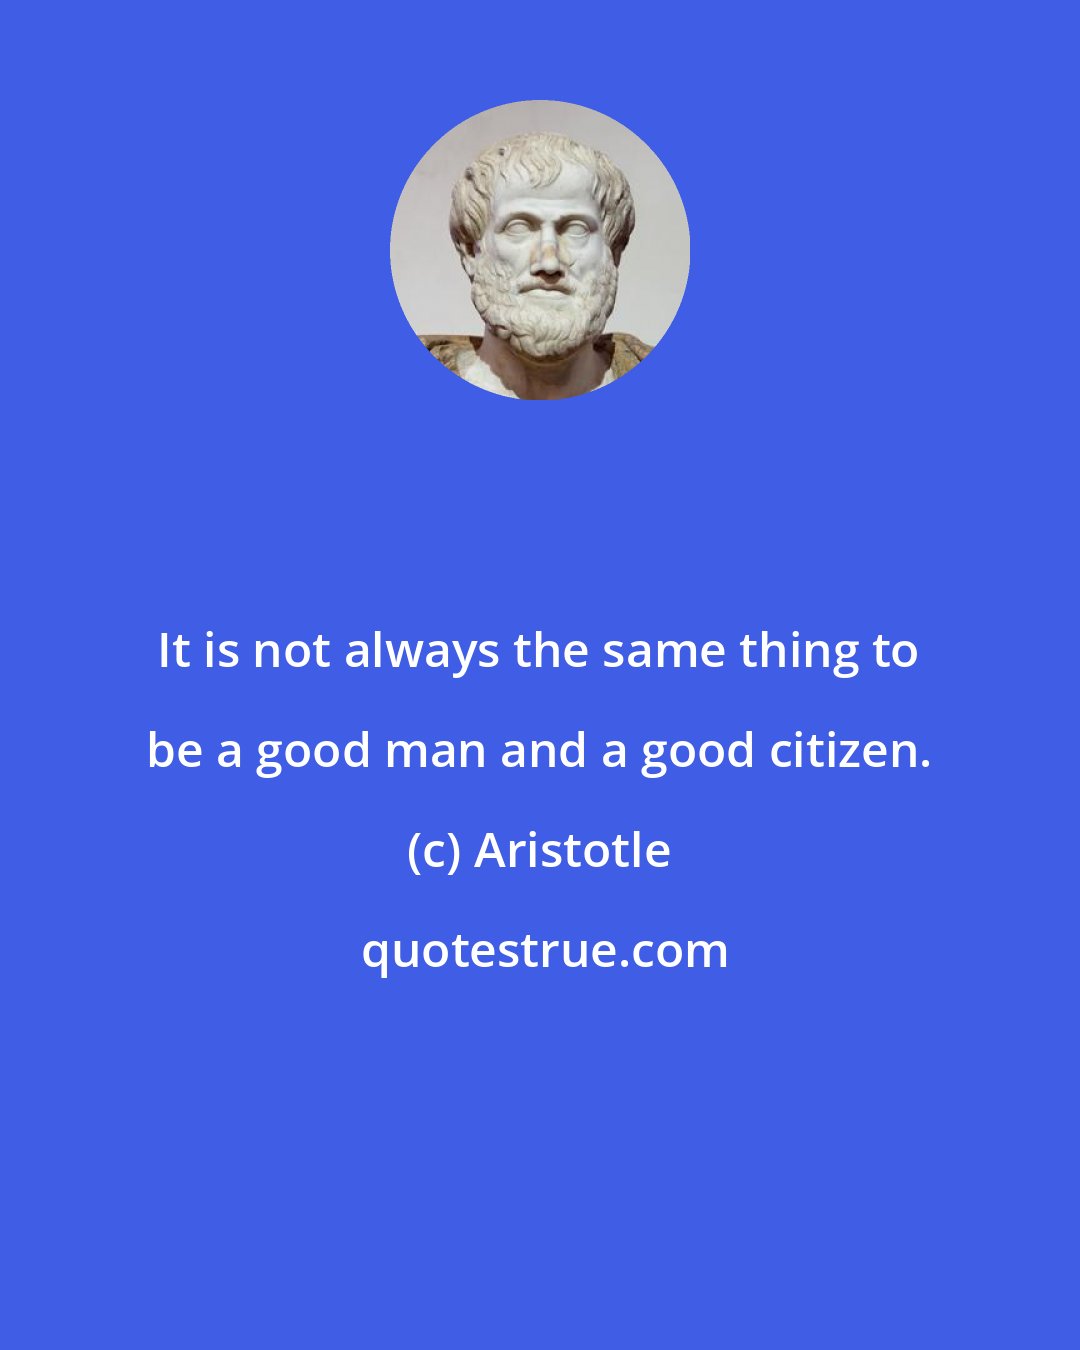 Aristotle: It is not always the same thing to be a good man and a good citizen.